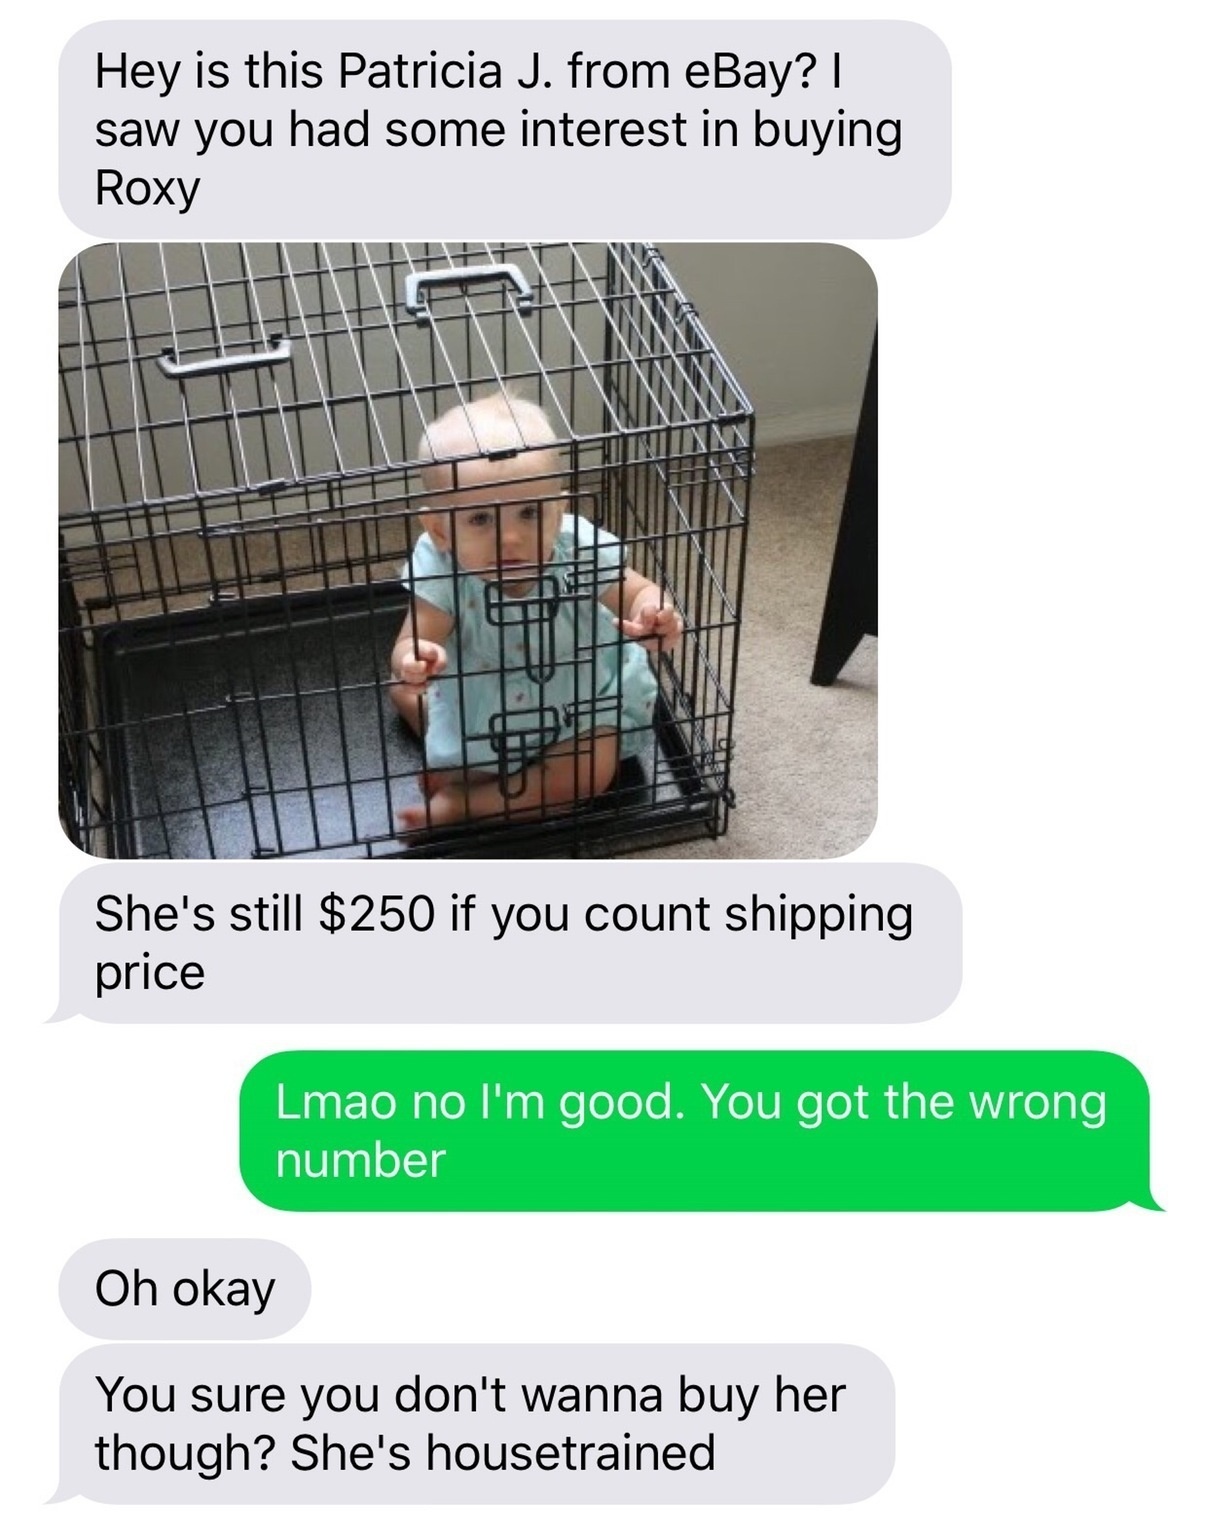 material - Hey is this Patricia J. from eBay? saw you had some interest in buying Roxy She's still $250 if you count shipping price Lmao no I'm good. You got the wrong number Oh okay You sure you don't wanna buy her though? She's housetrained